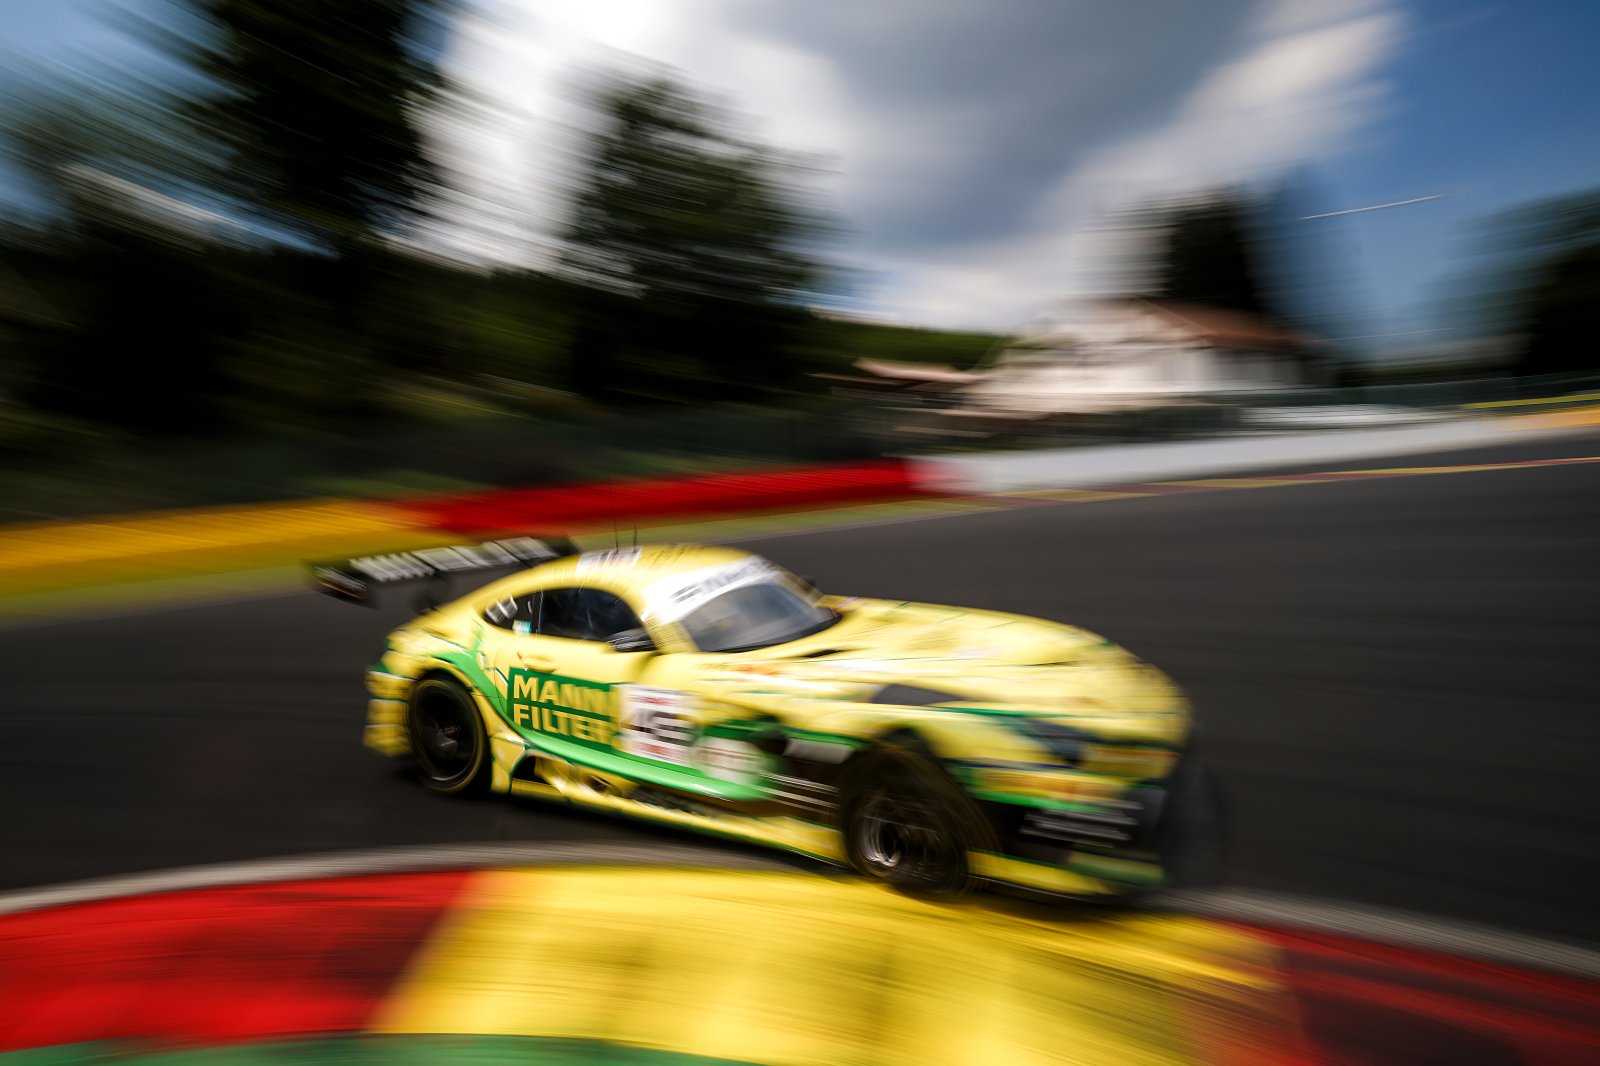 Mercedes-AMG Team Mann-Filter leads Free Practice ahead of centenary CrowdStrike 24 Hours of Spa 